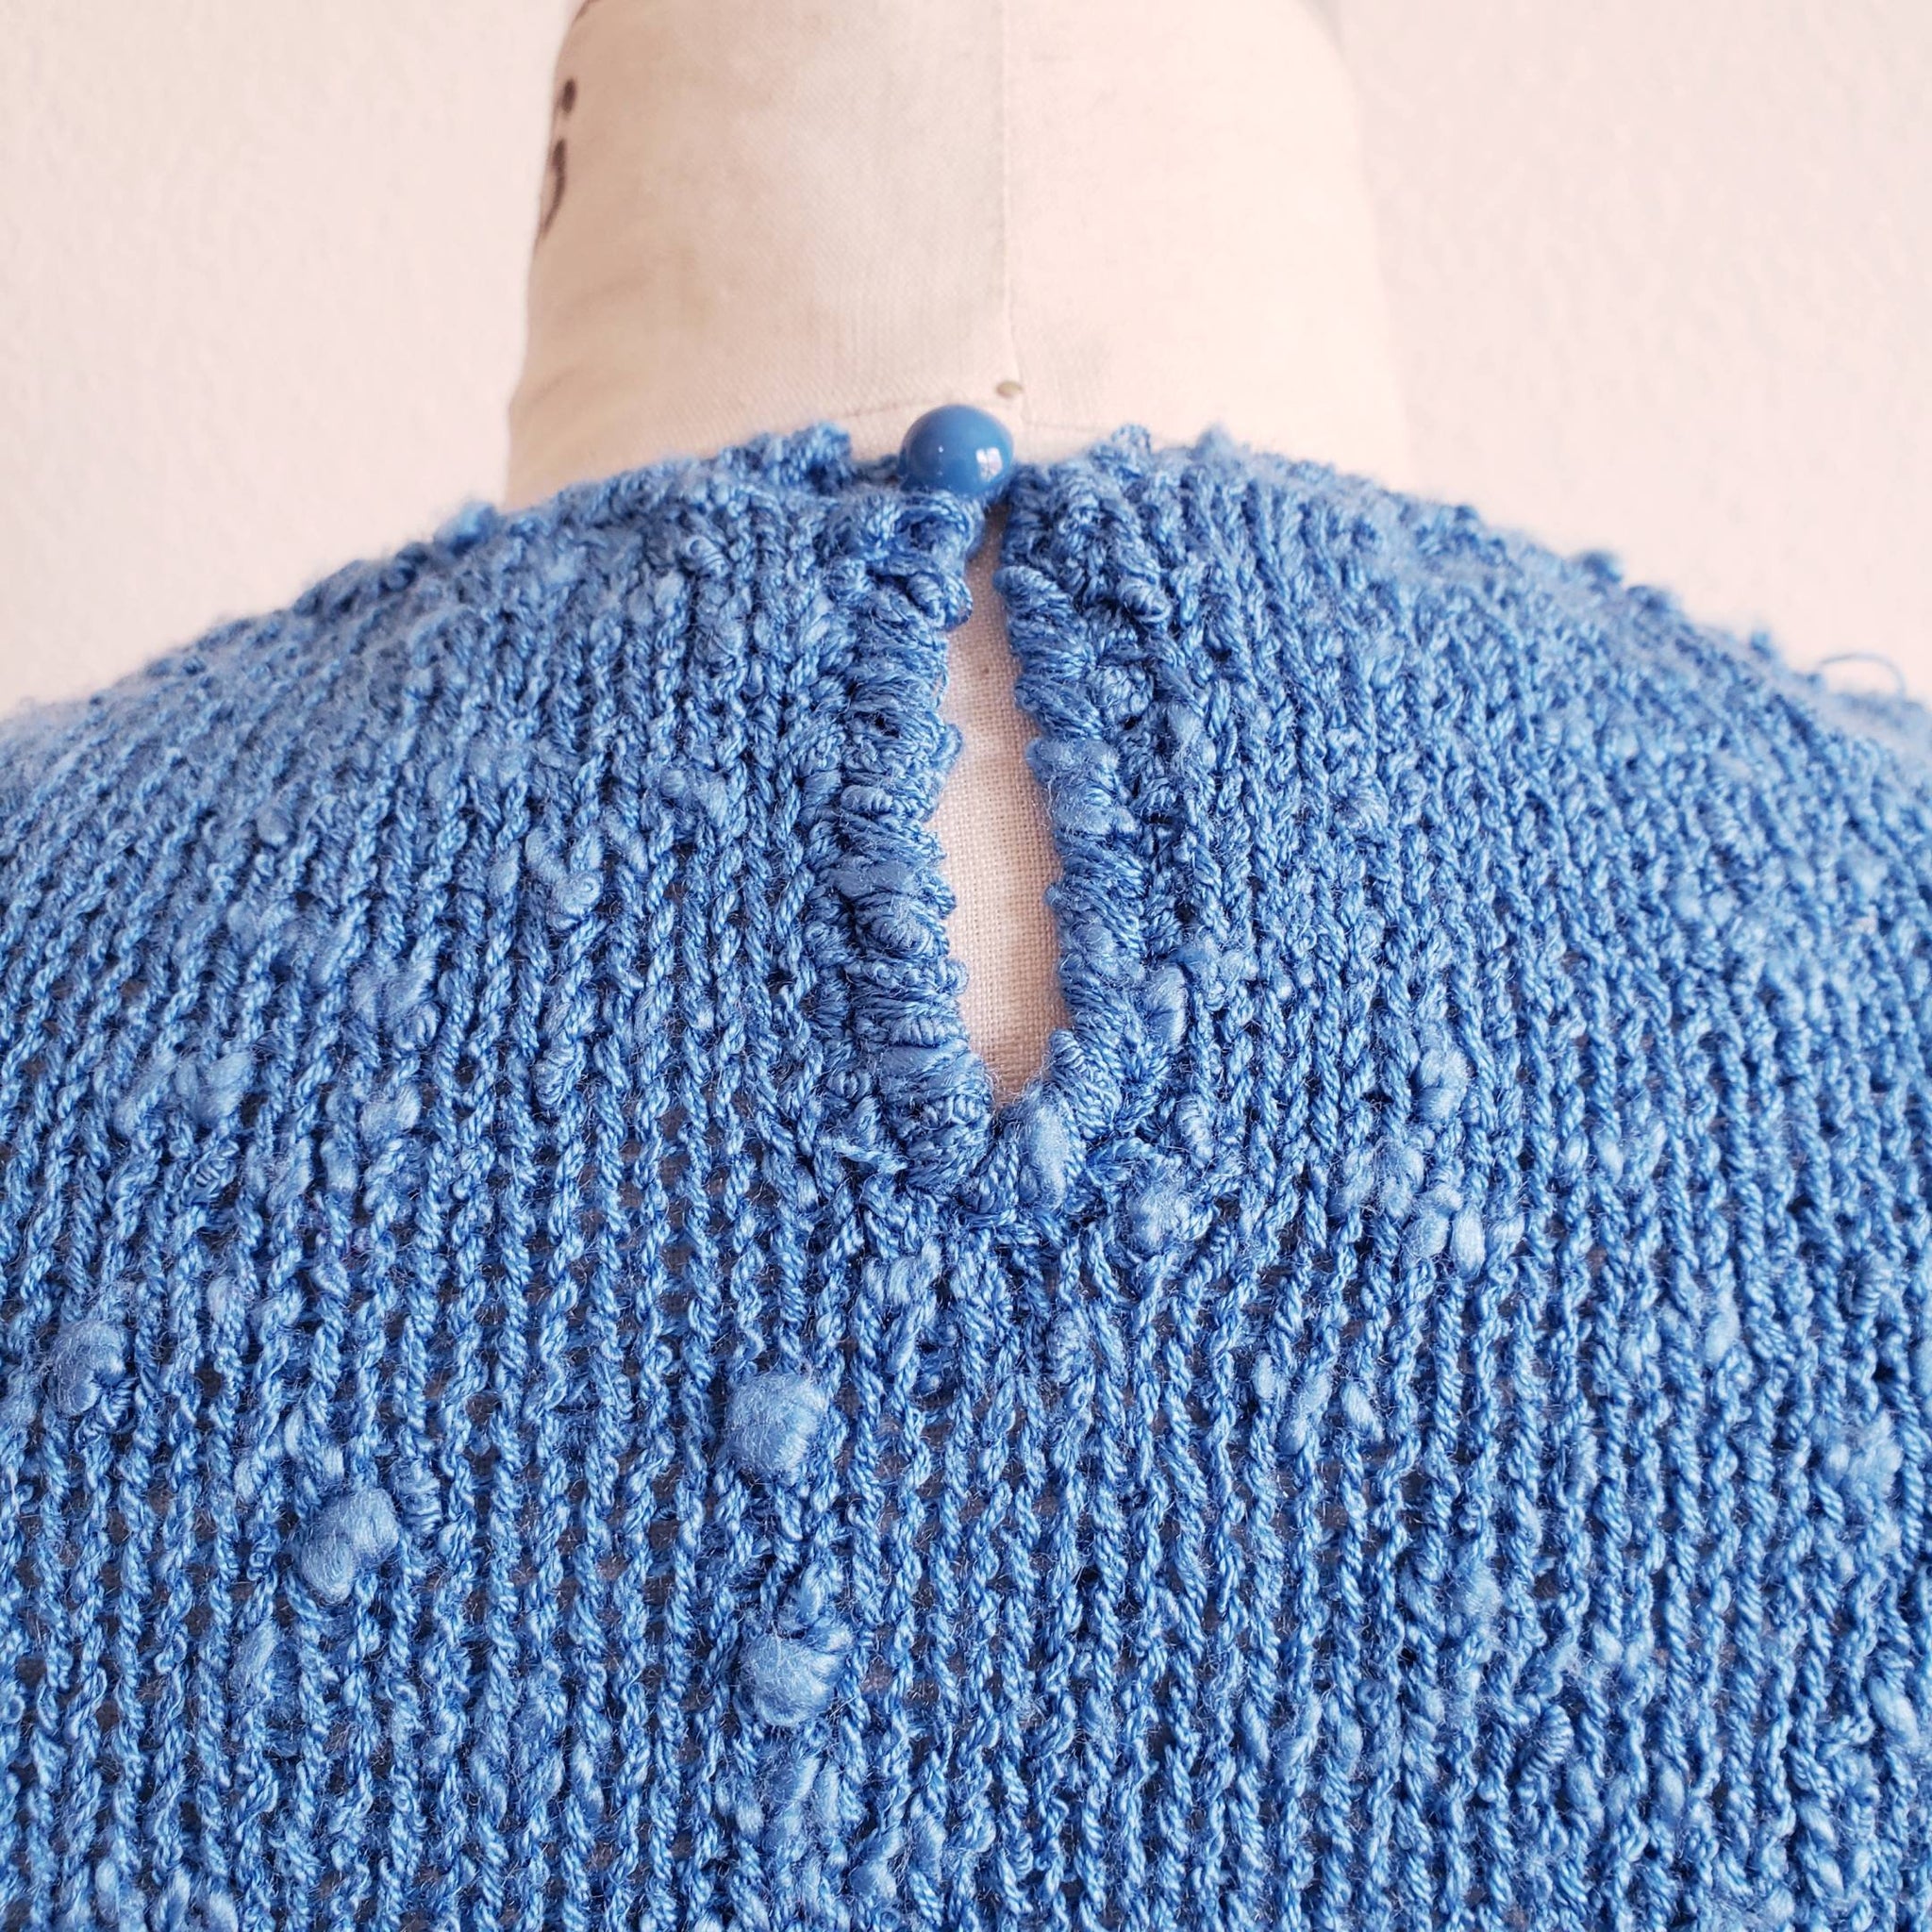 Vintage 70s/80s Blue Le Roy Knitwear Sweater - ChicCityVintage